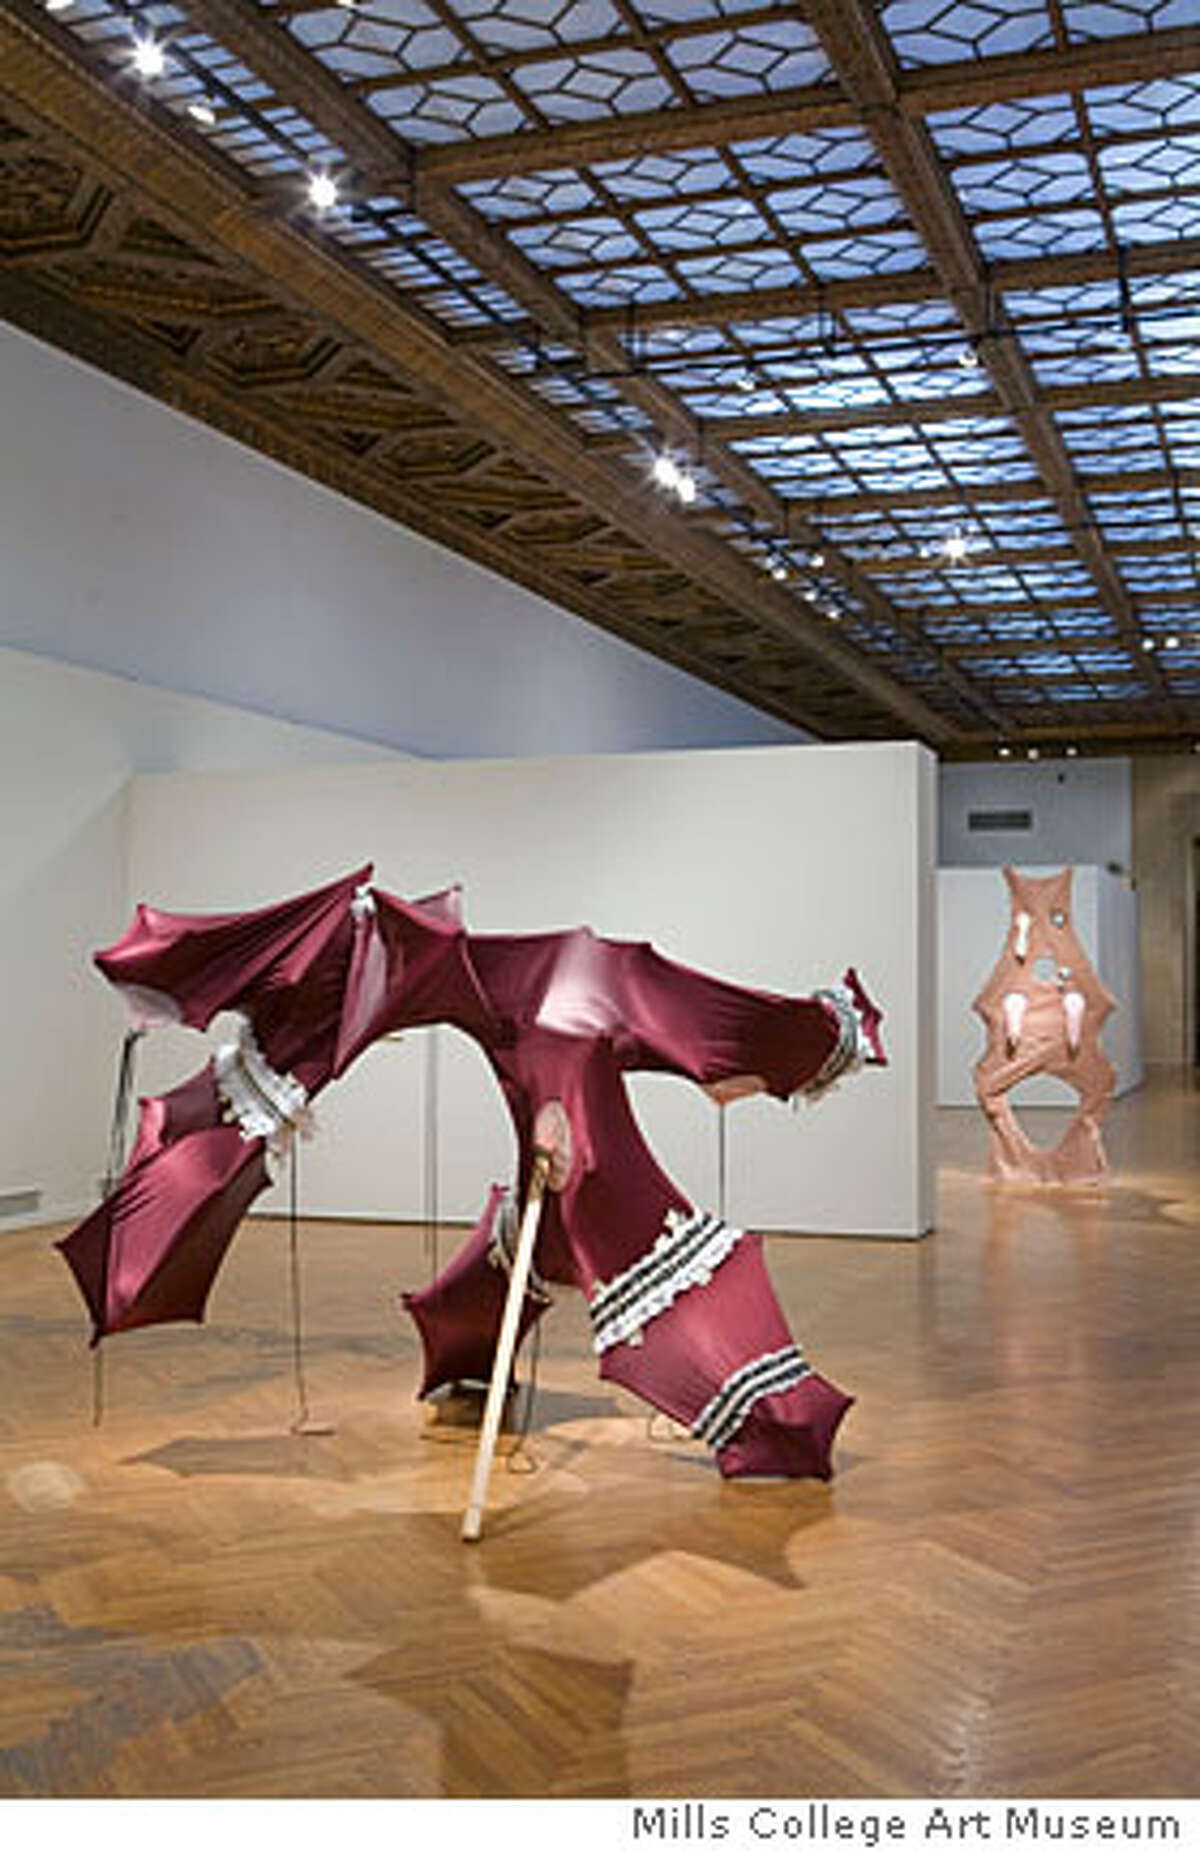 Caption: "Private Dancer" (2007) Fabric, lace, wood, pins by Lara Schnitger 77 x 116 x 96 inches Courtesy of Mills College Art Museum